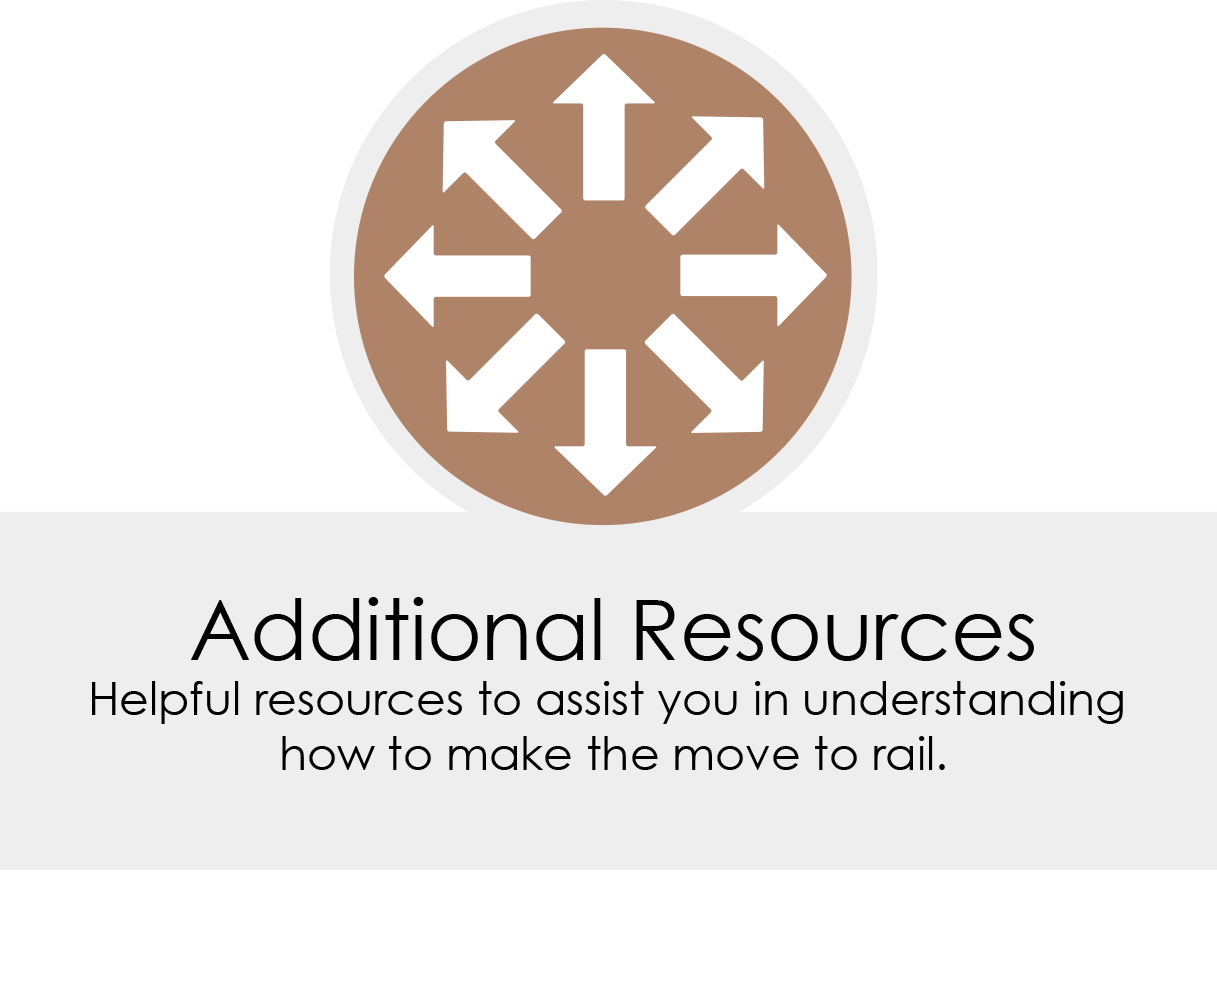 resources to help move to rail